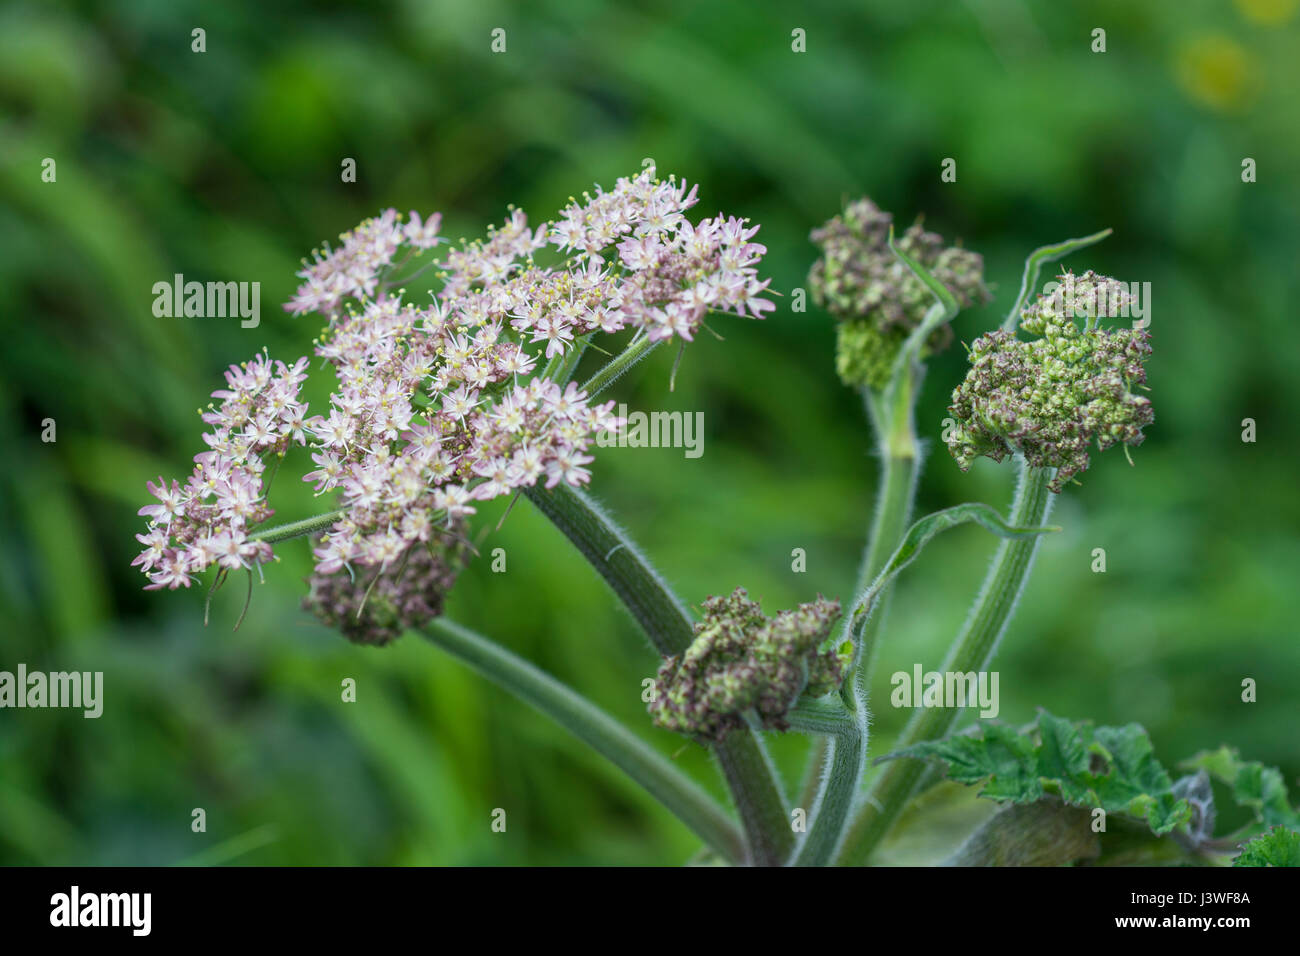 Hogweed / Cow Parsnip - Heracleum sphondylium - flower cluster and flower buds. The plant sap has a bad reputation for blistering skin. Stock Photo